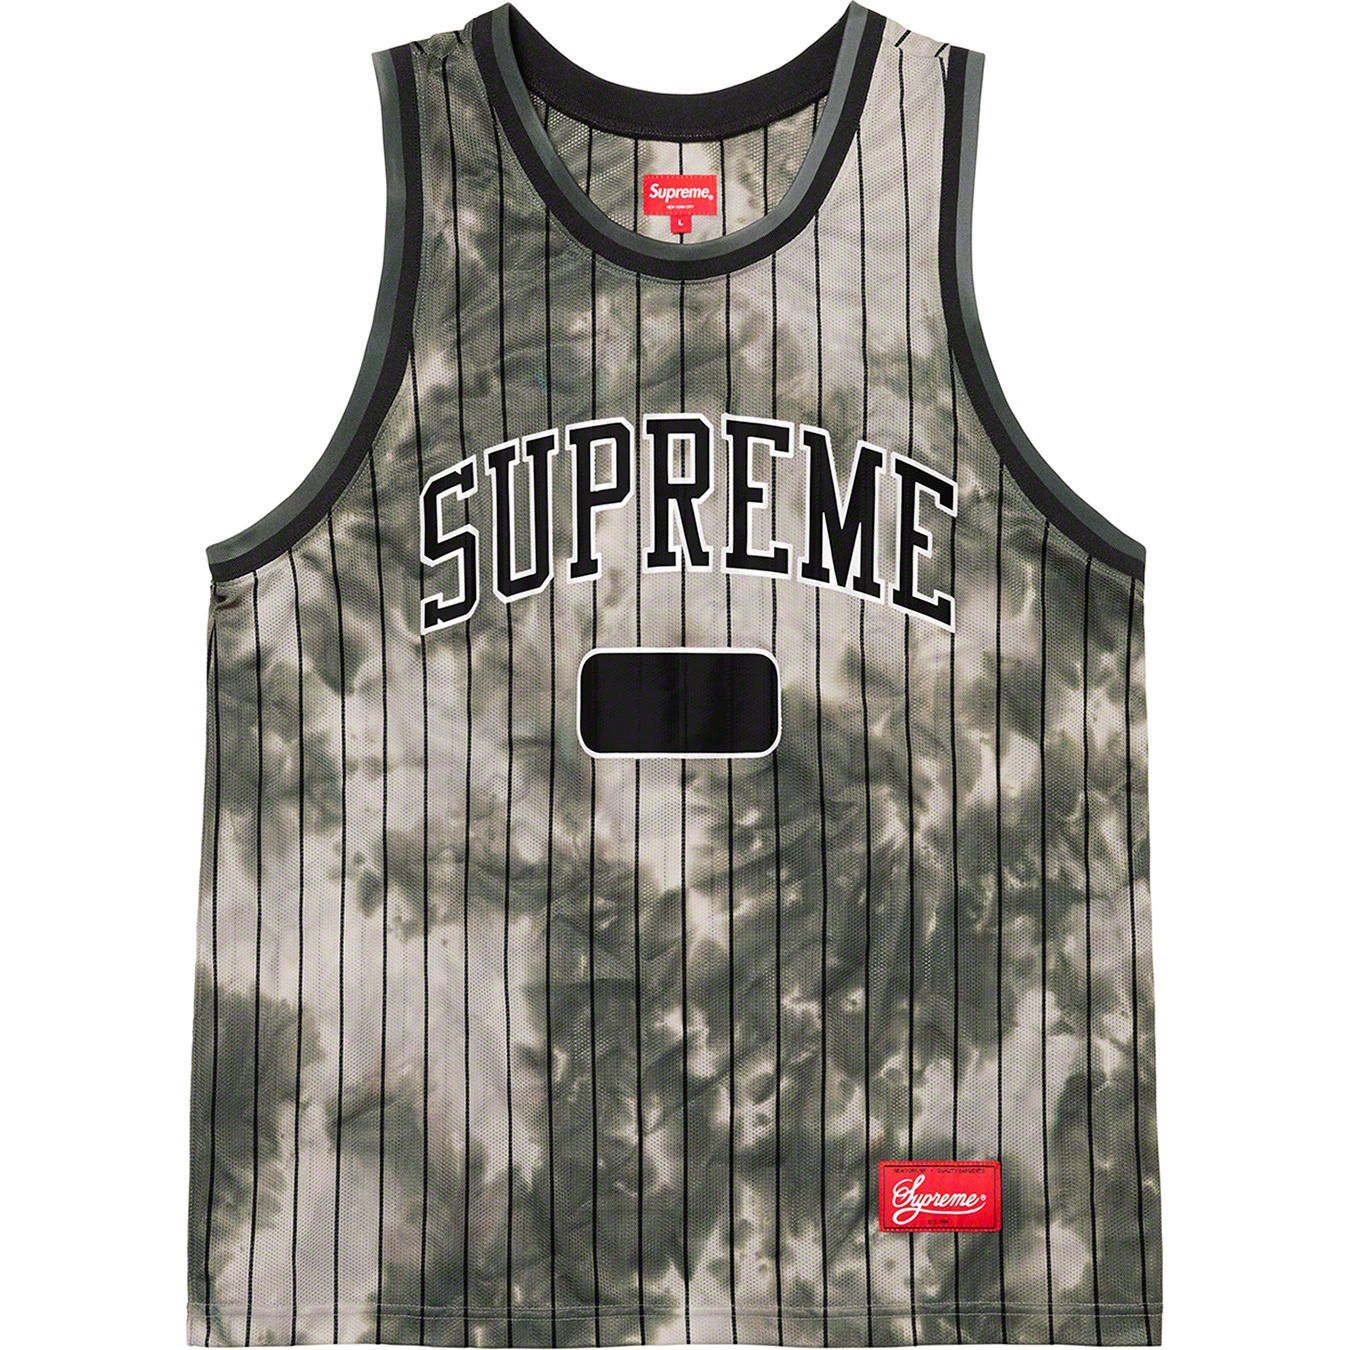 Supreme Dyed Basketball Jersey #20, Perfect condition